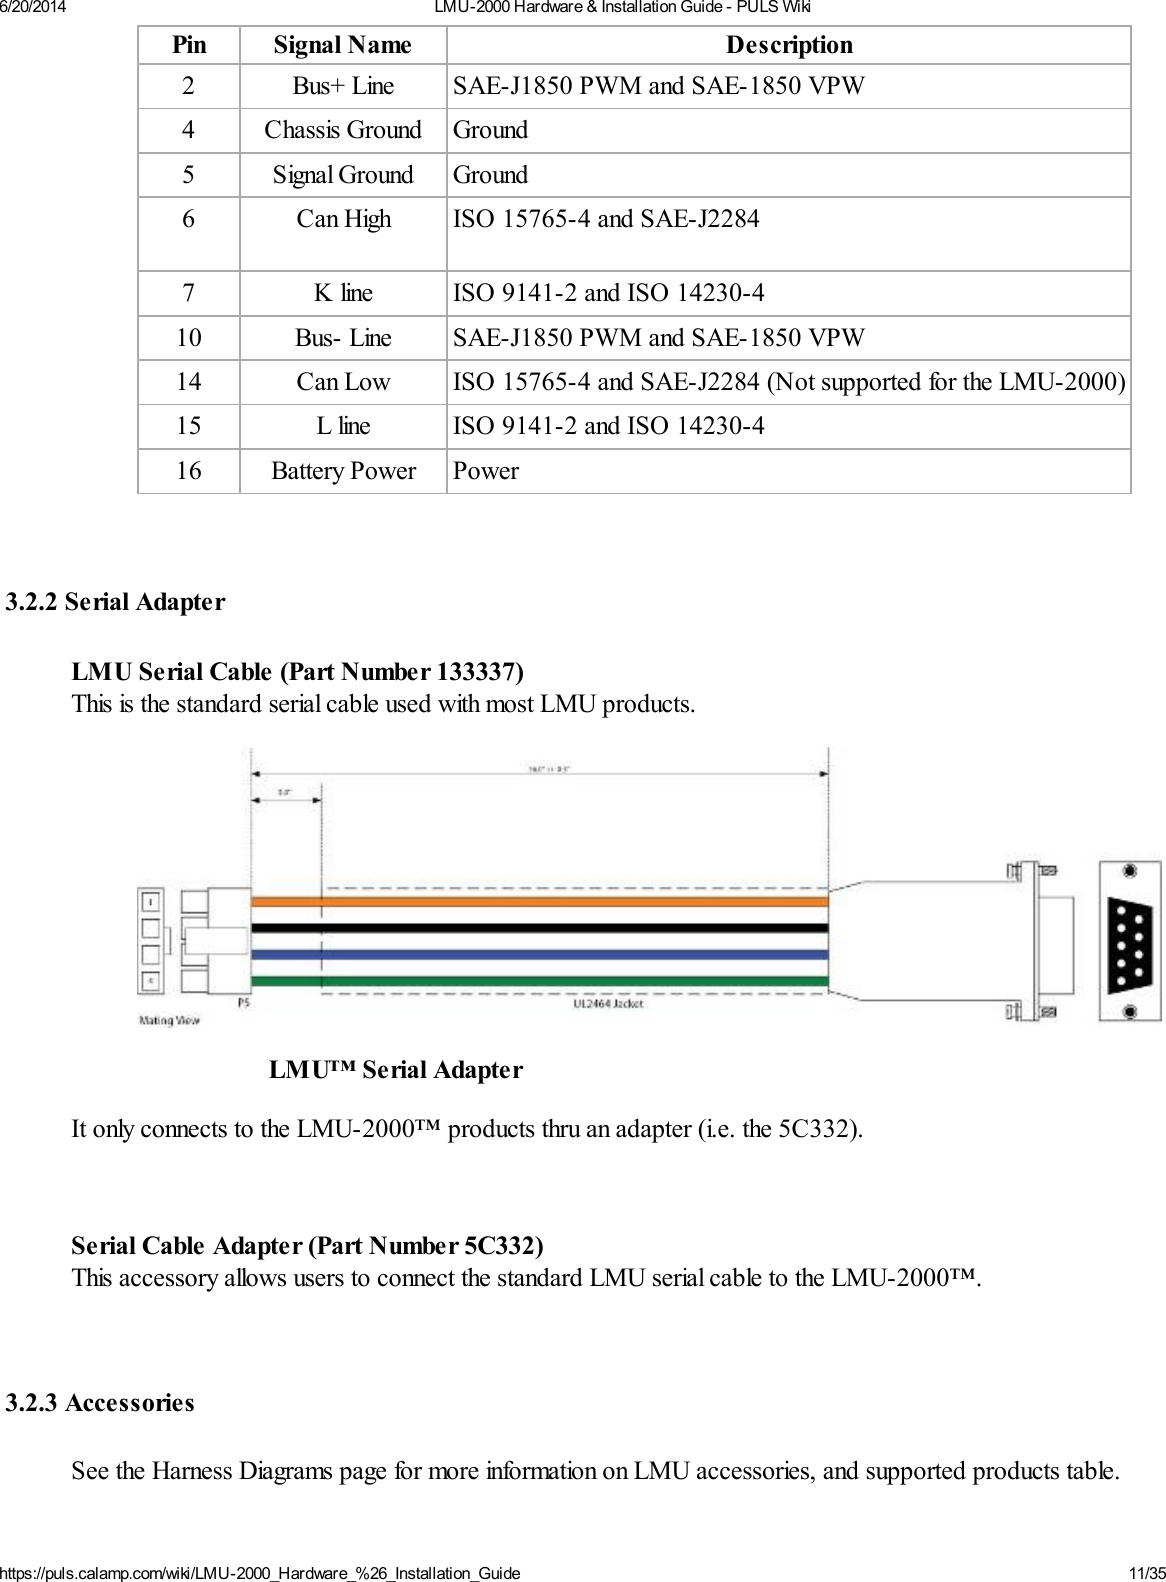 6/20/2014 LMU-2000 Hardware &amp; Installation Guide - PULS Wikihttps://puls.calamp.com/wiki/LMU-2000_Hardware_%26_Installation_Guide 11/35Pin Signal Name Description2 Bus+ Line SAE-J1850 PWM and SAE-1850 VPW4 Chassis Ground Ground5 Signal Ground Ground6 Can High ISO 15765-4 and SAE-J22847 K line ISO 9141-2 and ISO 14230-410 Bus- Line SAE-J1850 PWM and SAE-1850 VPW14 Can Low ISO 15765-4 and SAE-J2284 (Not supported for the LMU-2000)15 L line ISO 9141-2 and ISO 14230-416 Battery Power Power3.2.2 Serial AdapterLMU Serial Cable (Part Number 133337)This is the standard serial cable used with most LMU products.LMU™ Serial AdapterIt only connects to the LMU-2000™ products thru an adapter (i.e. the 5C332).Serial Cable Adapter (Part Number 5C332)This accessory allows users to connect the standard LMU serial cable to the LMU-2000™.3.2.3 AccessoriesSee the Harness Diagrams page for more information on LMU accessories, and supported products table.